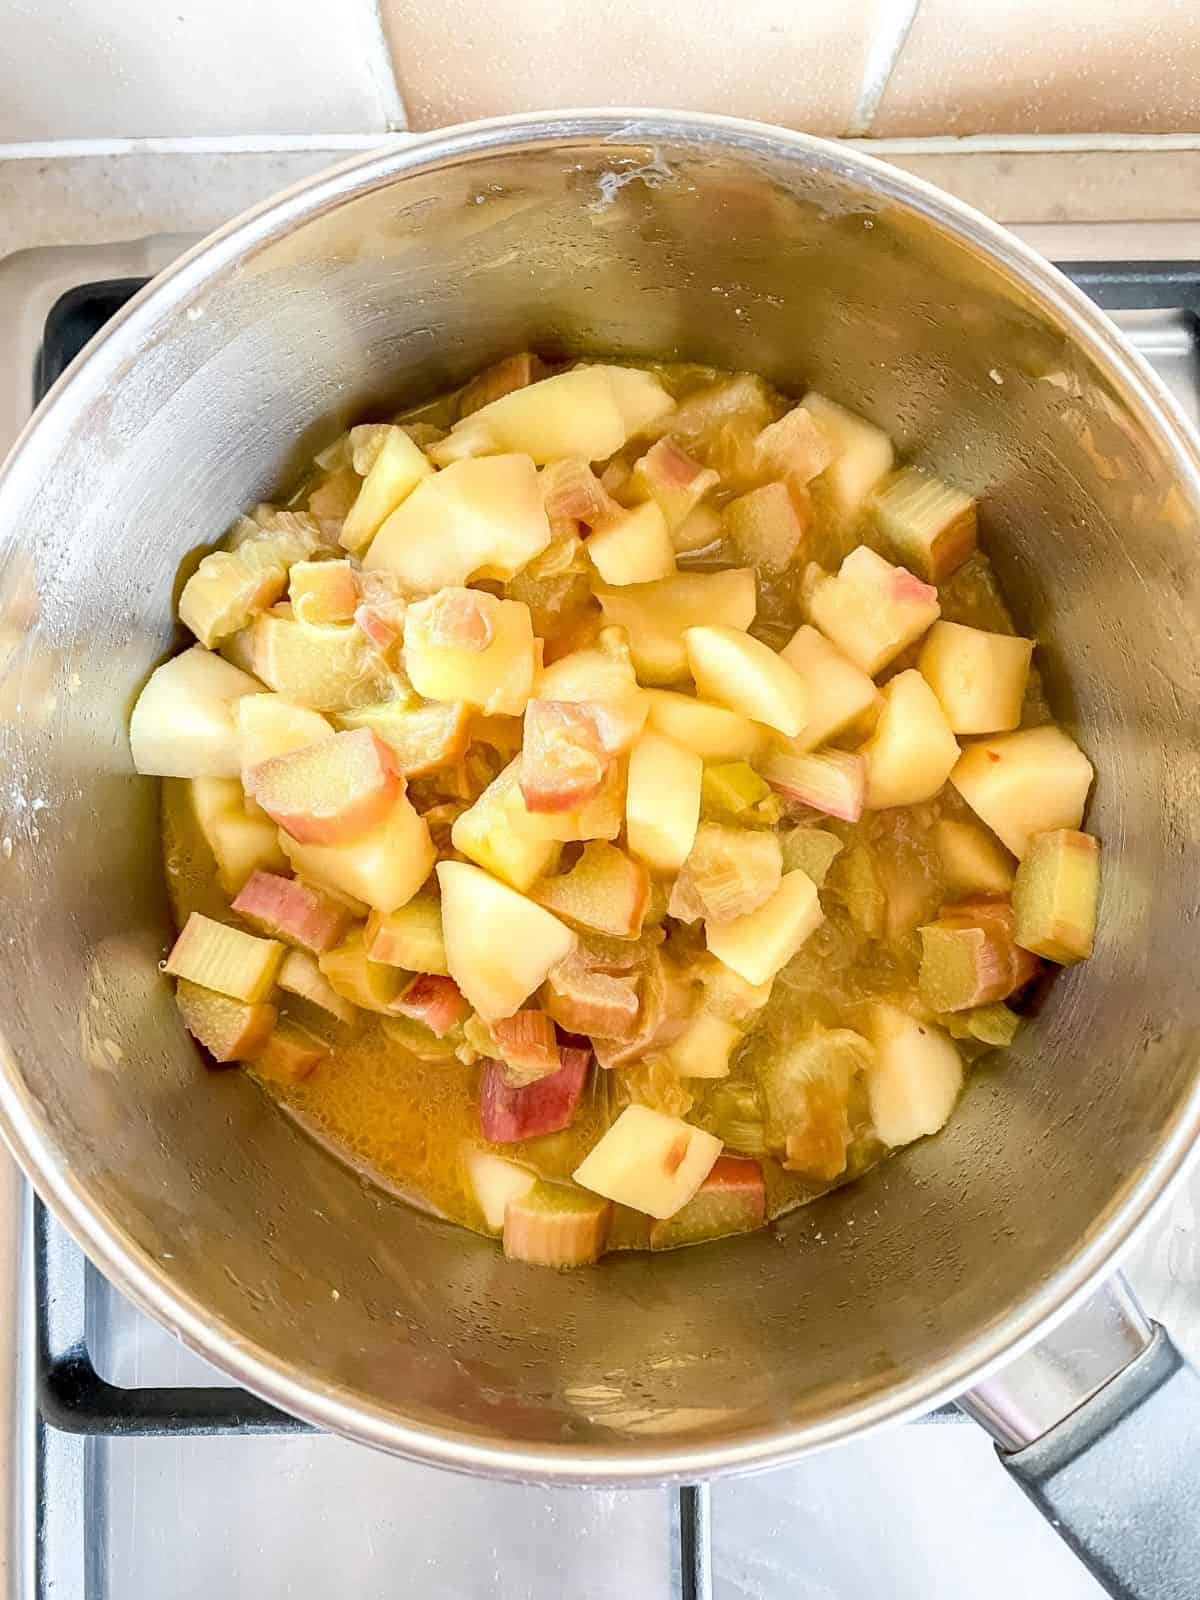 rhubarb and apple compote in a pan.